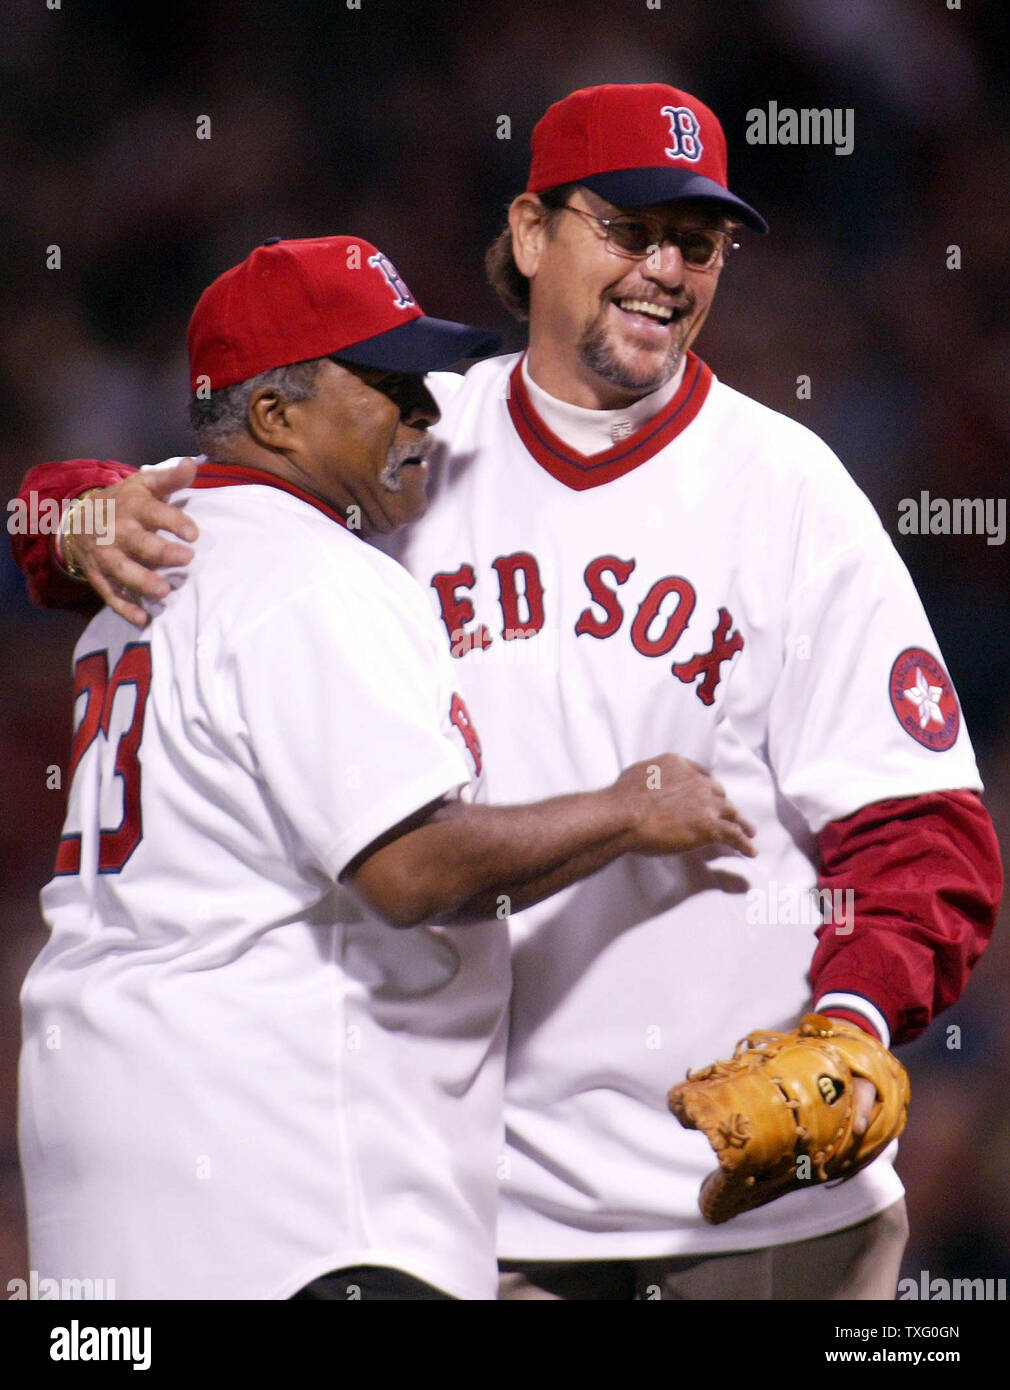 Retired pitcher Luis Tiant and Hall Fame Catcher Carlton Fisk, of the 1975 Boston Red Sox Team, embrace the pitching mount, throwing out and catching the first pitch, as